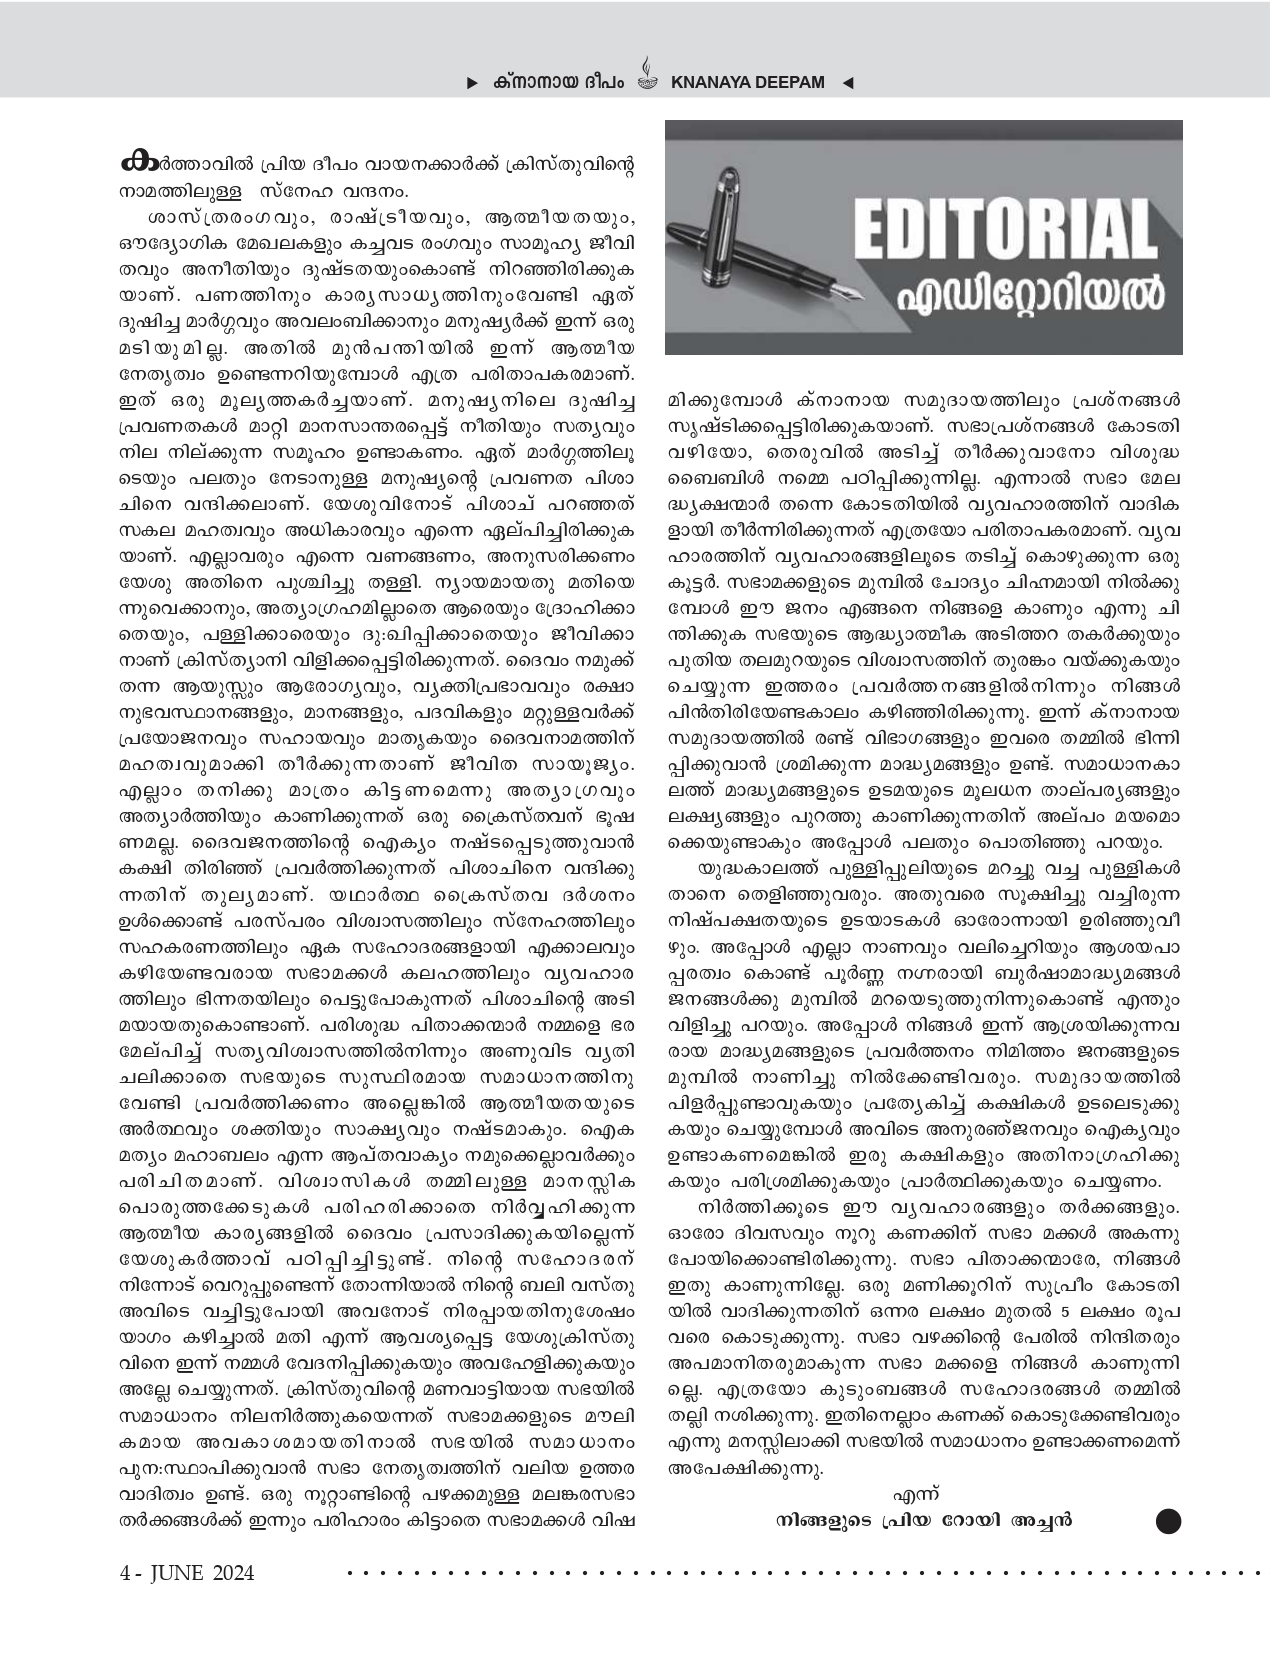 Editorial Message